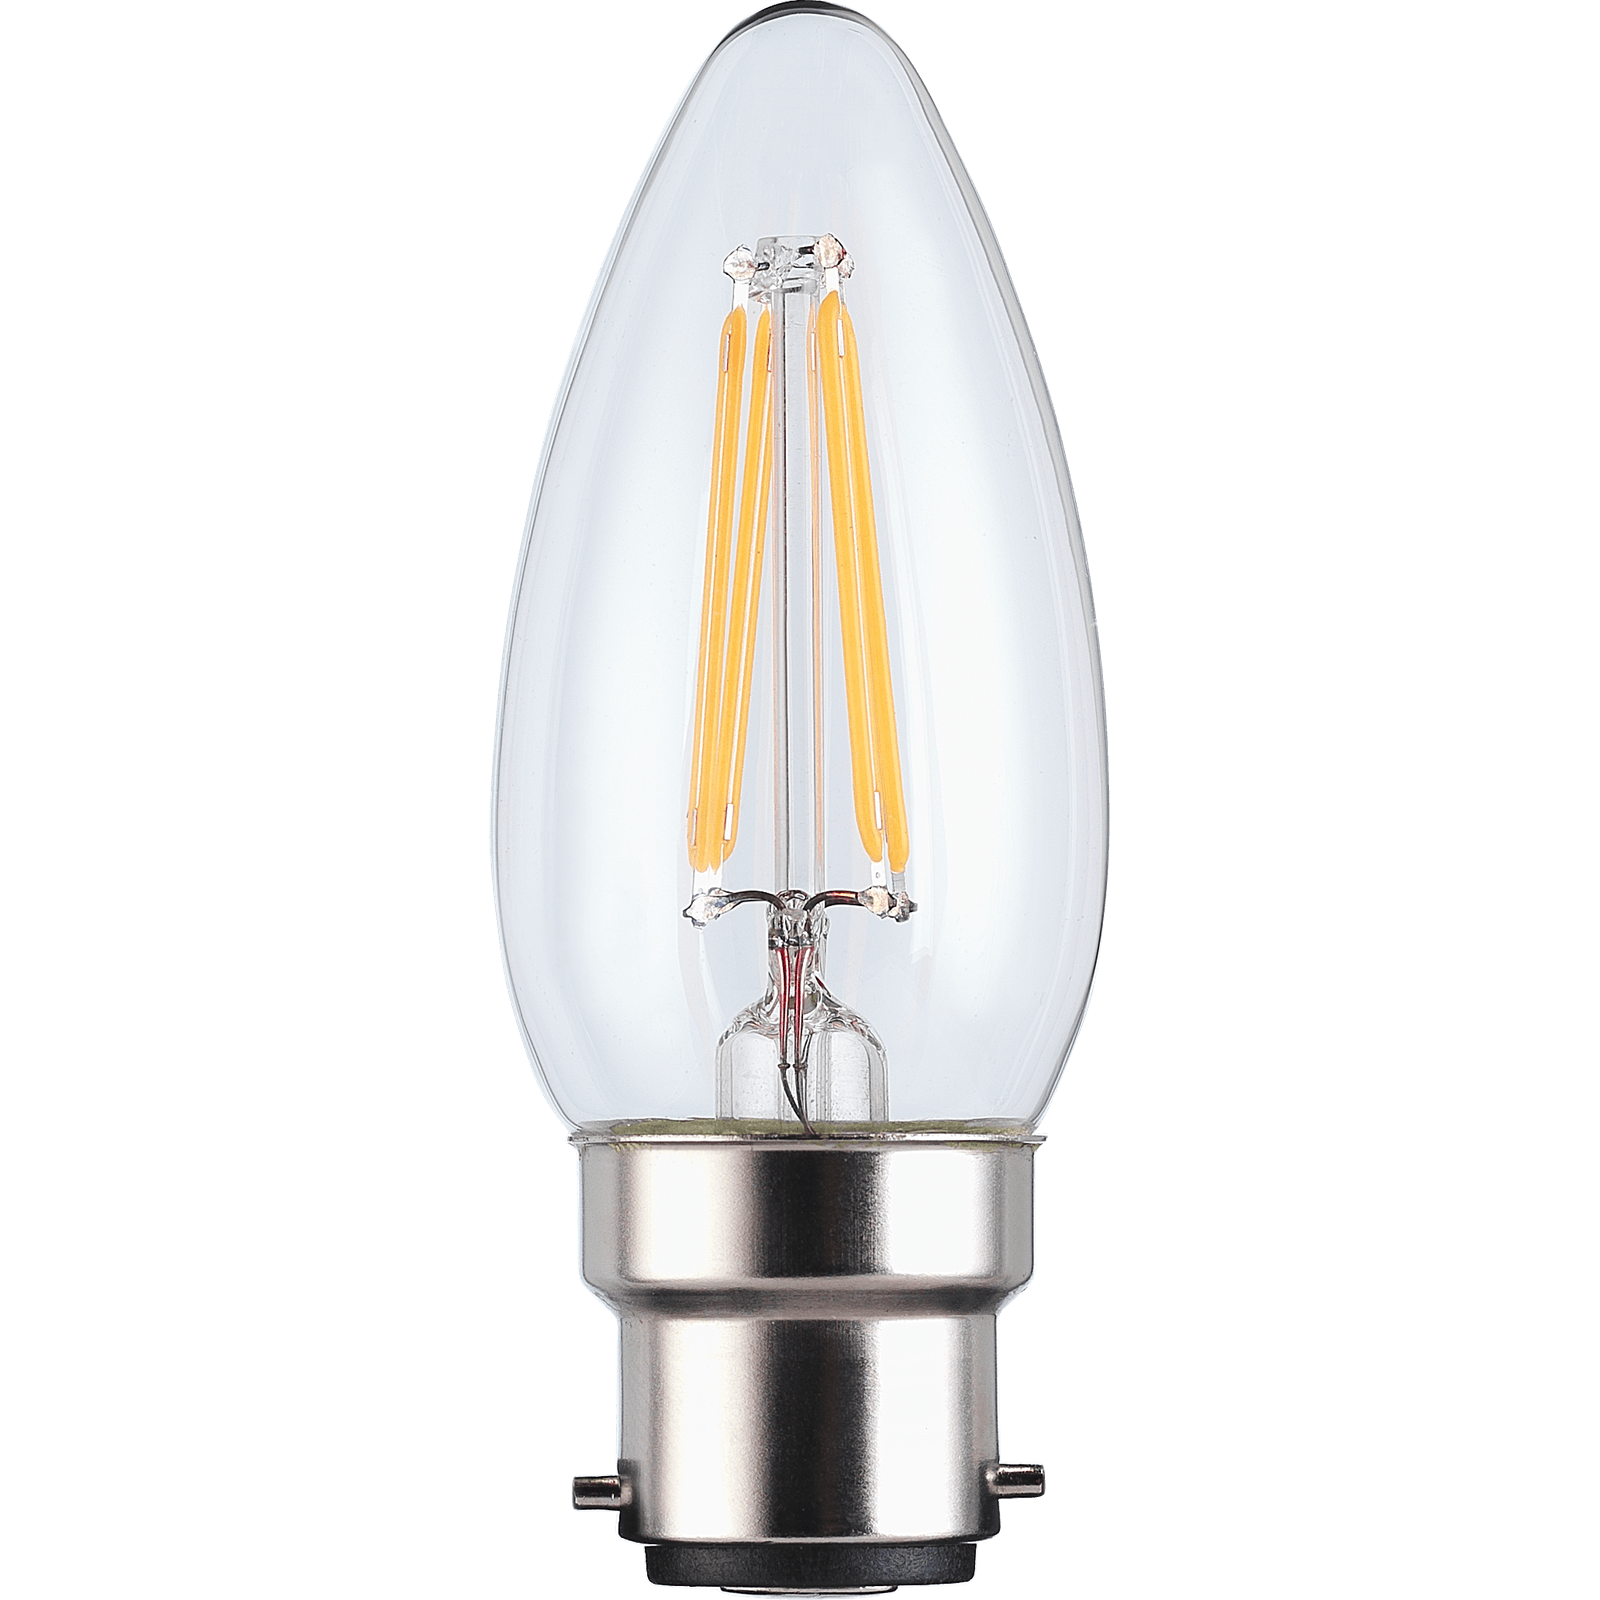 TCP LED Filament Clear Candle 4.5W B22 Dimmable Light Bulb